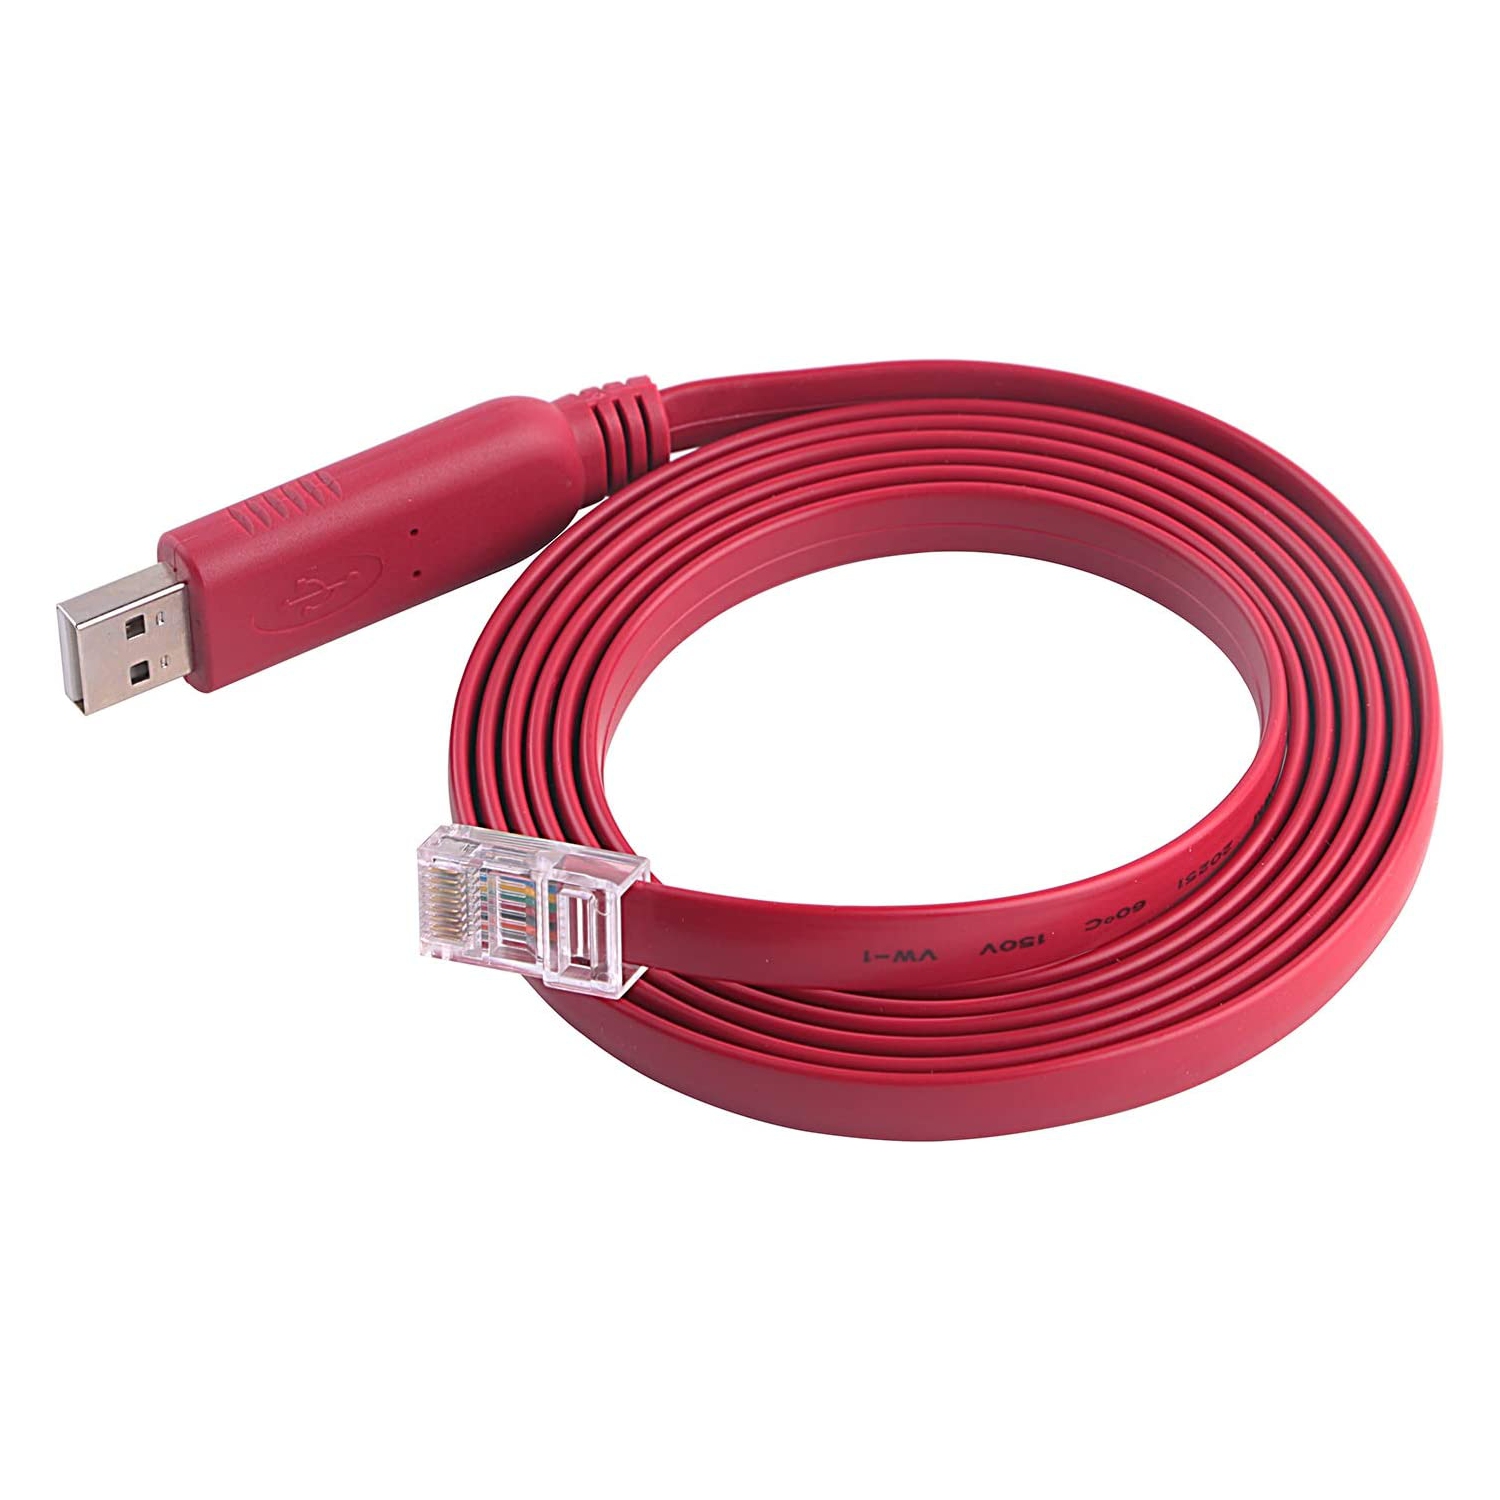 FTDI USB to Rs232 Serial Rj45 Console Rollover Cable for Cisco Huawei TP-Link Routers to Connect Laptop PC Support